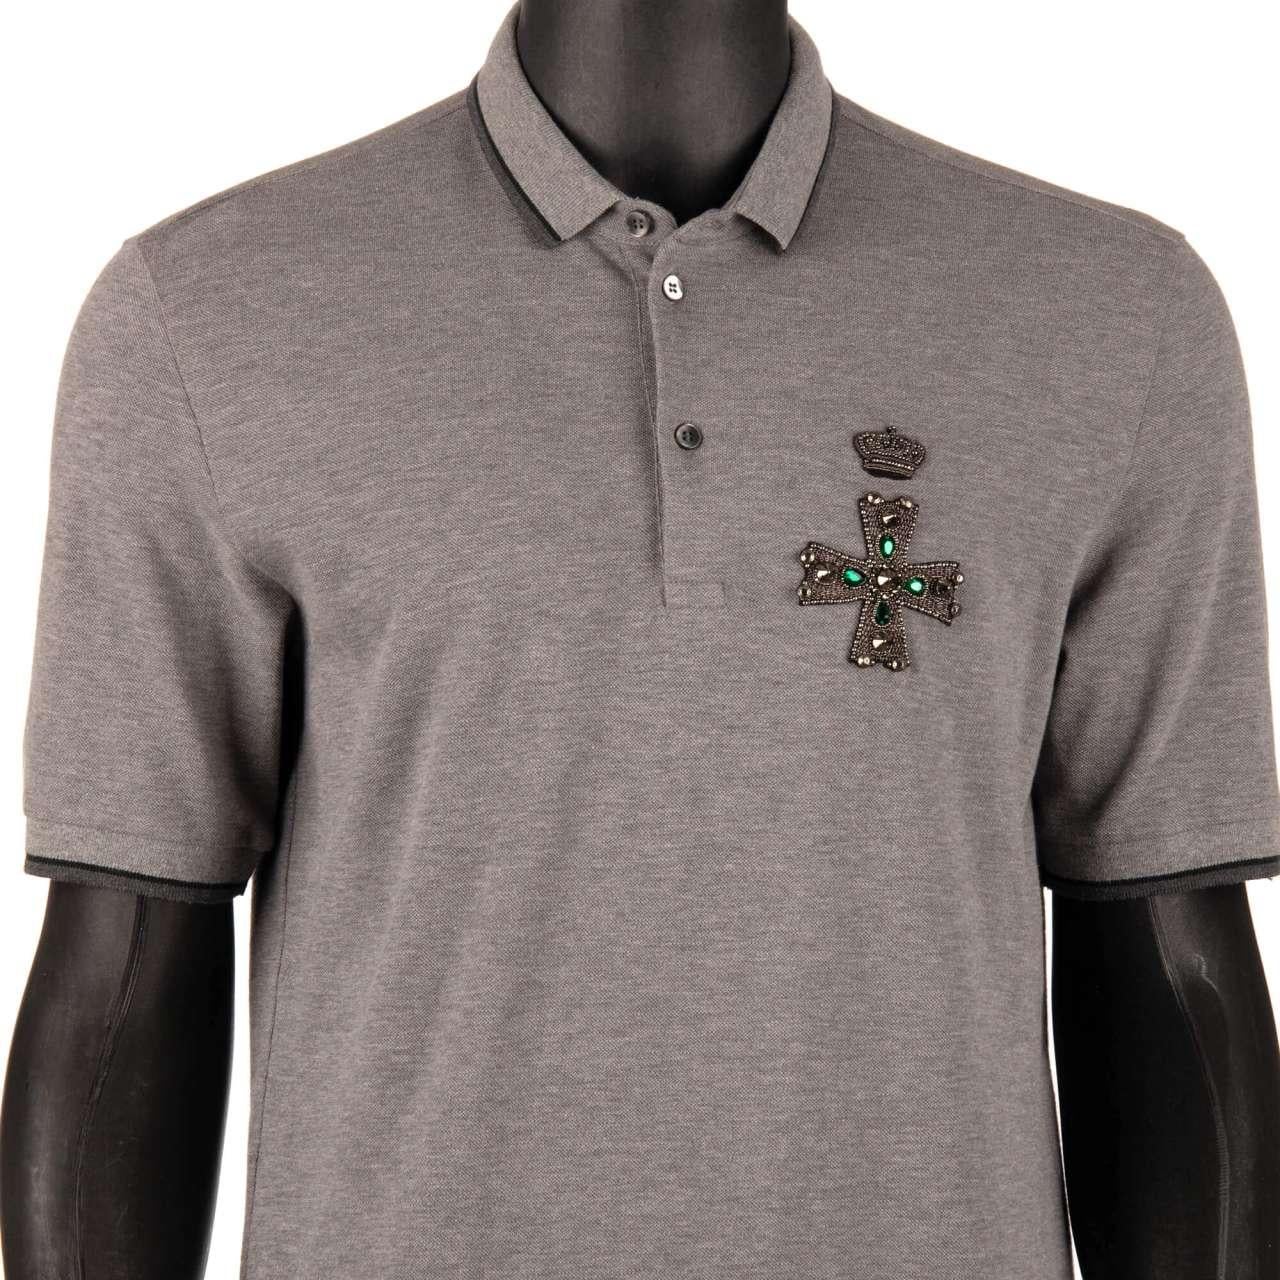 - Cotton Polo Shirt with crystals embroidered cross in front by DOLCE & GABBANA - New with Tags - MADE IN ITALY - Former RRP: EUR 795 - Long and Regular Cut - Polo collar - Buttons closure - Model: G8HM1Z-G7LJN-S8291 - Material: 100% Cotton - Color: